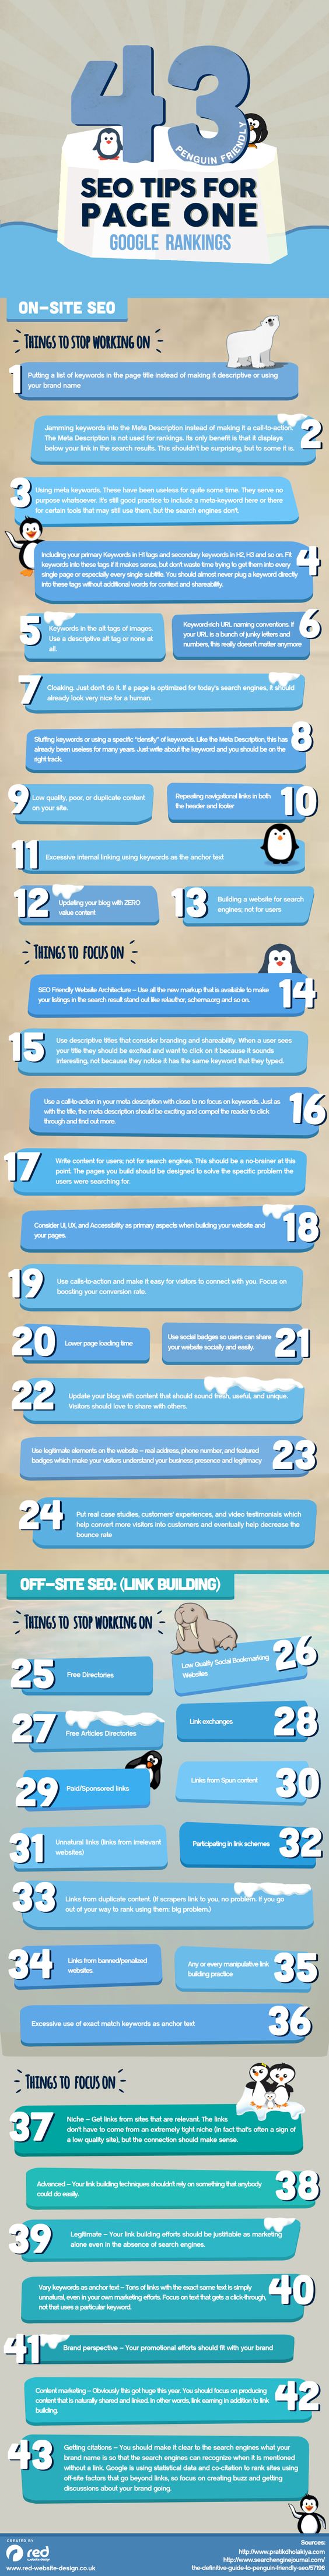 43 Penguin Friendly SEO Tips for Page One Google Rankings